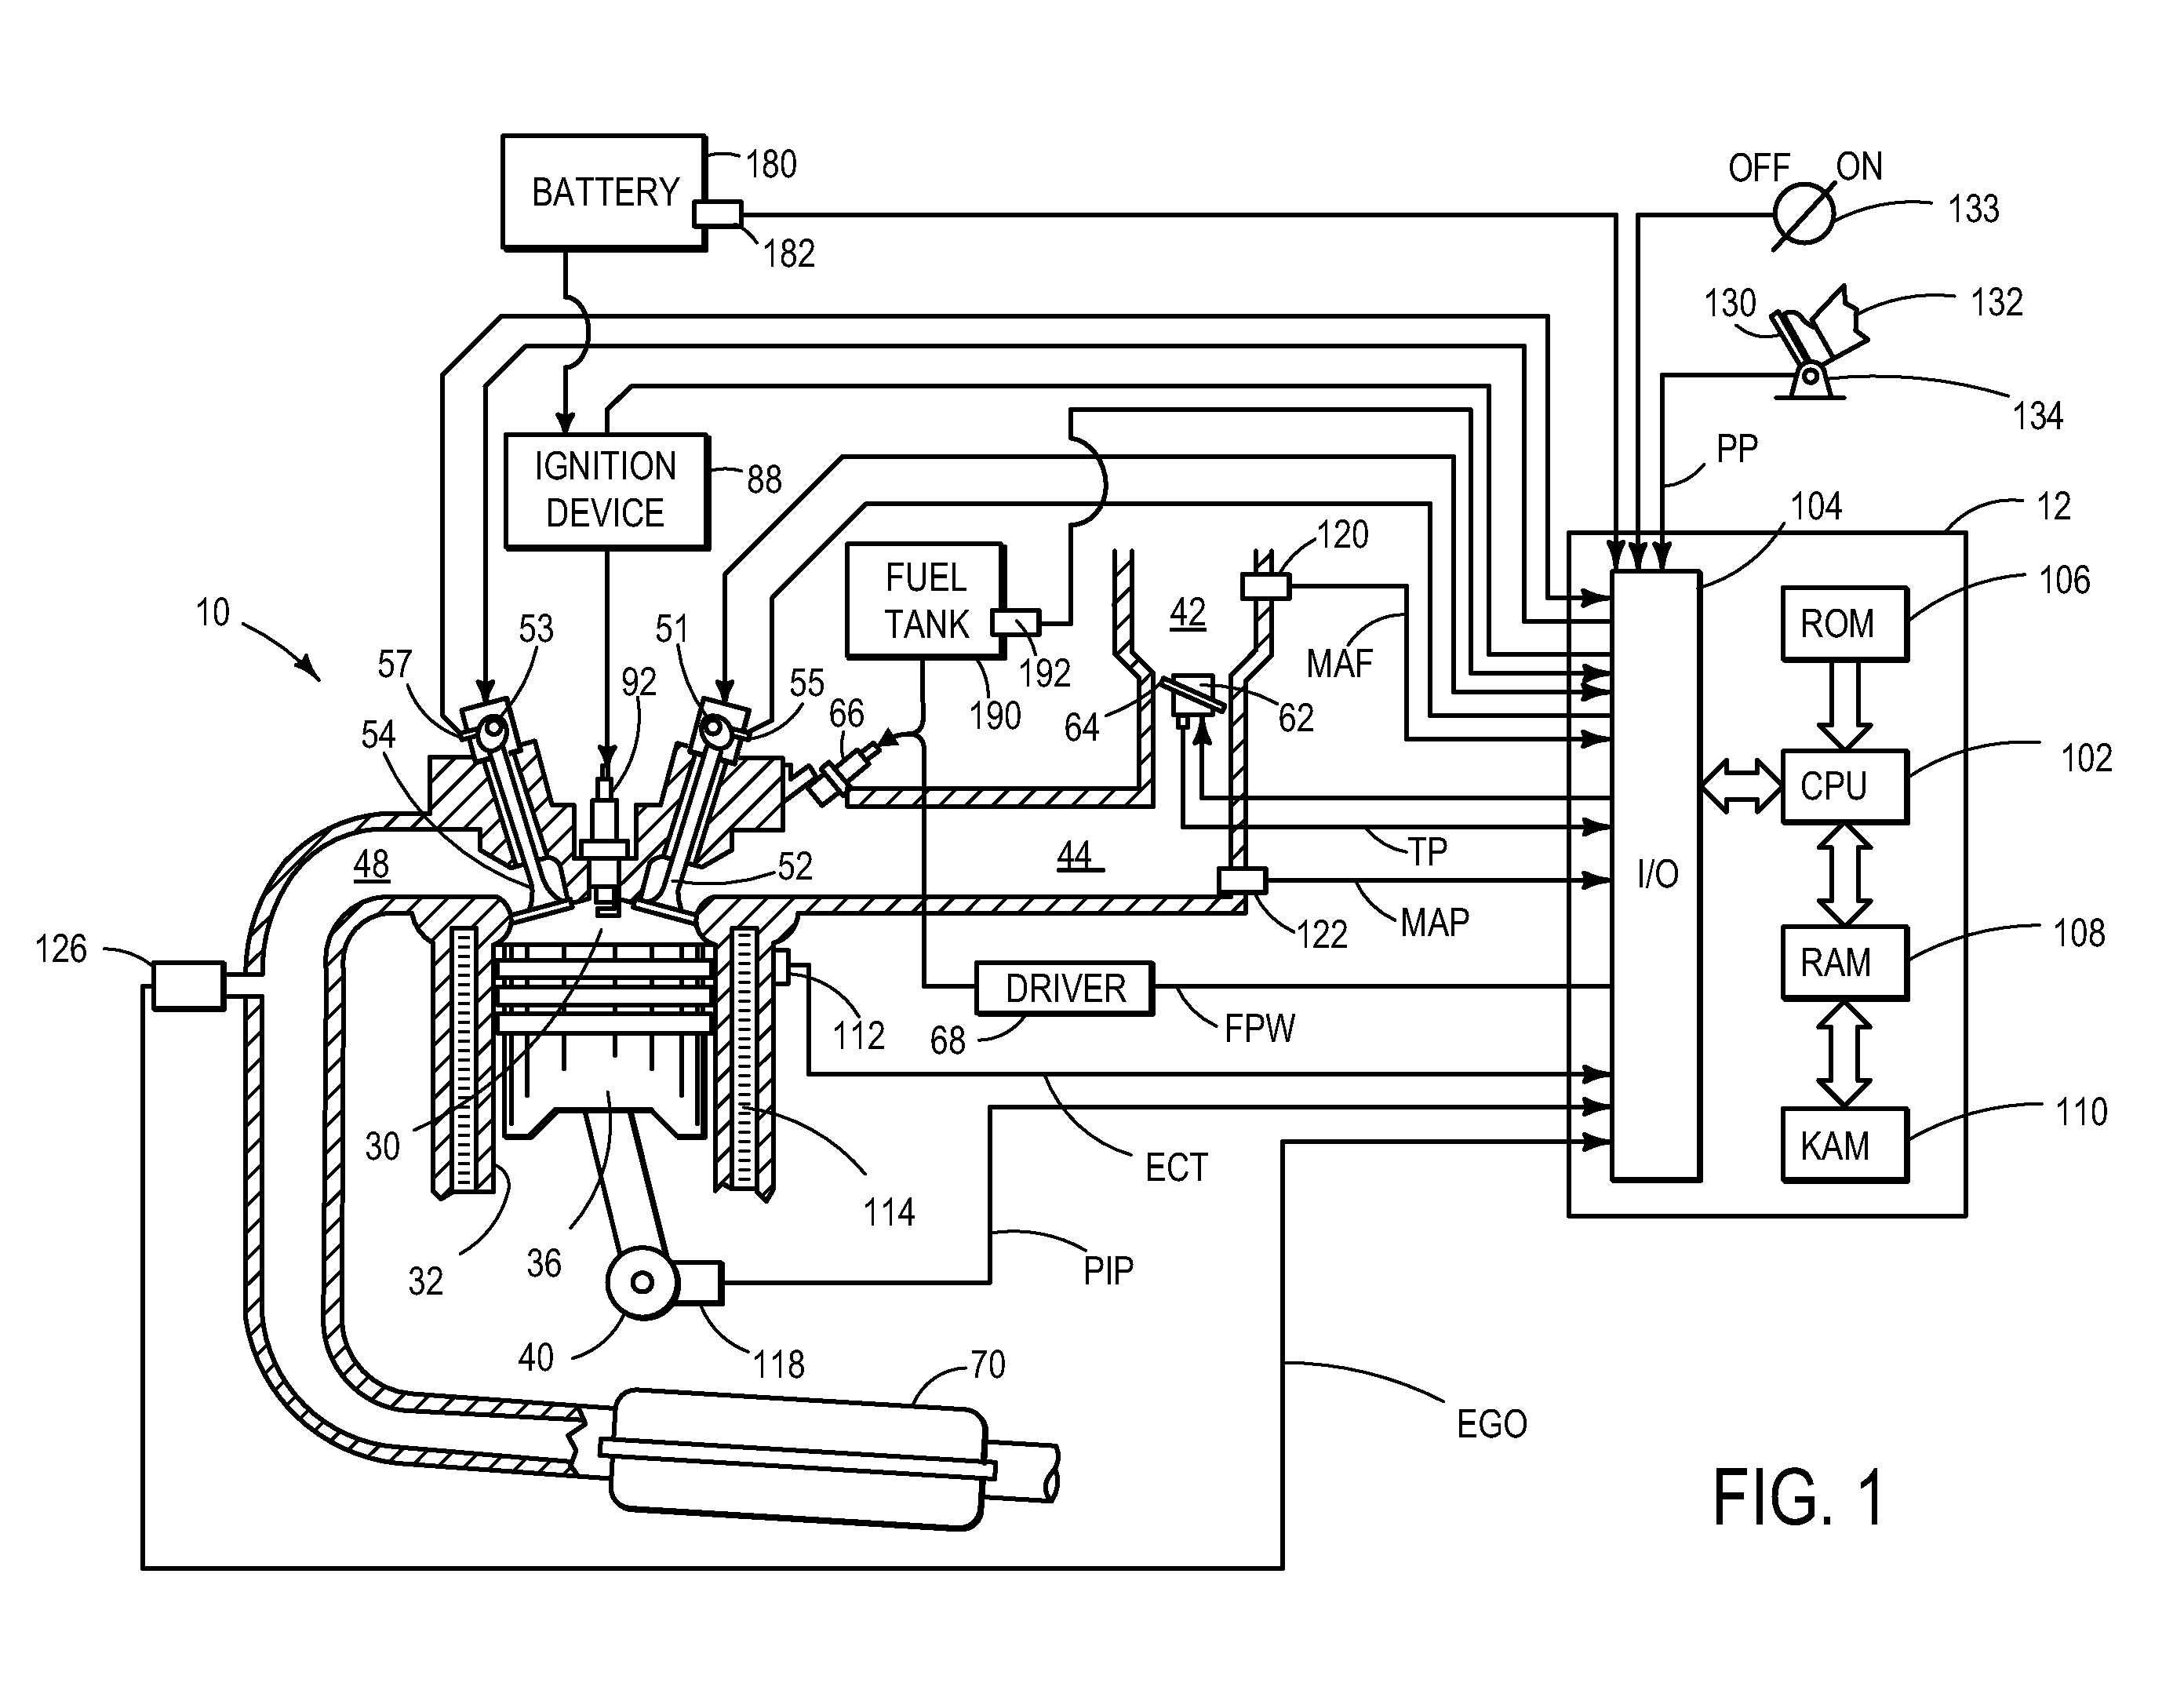 Ignition Energy Control for Mixed Fuel Engine